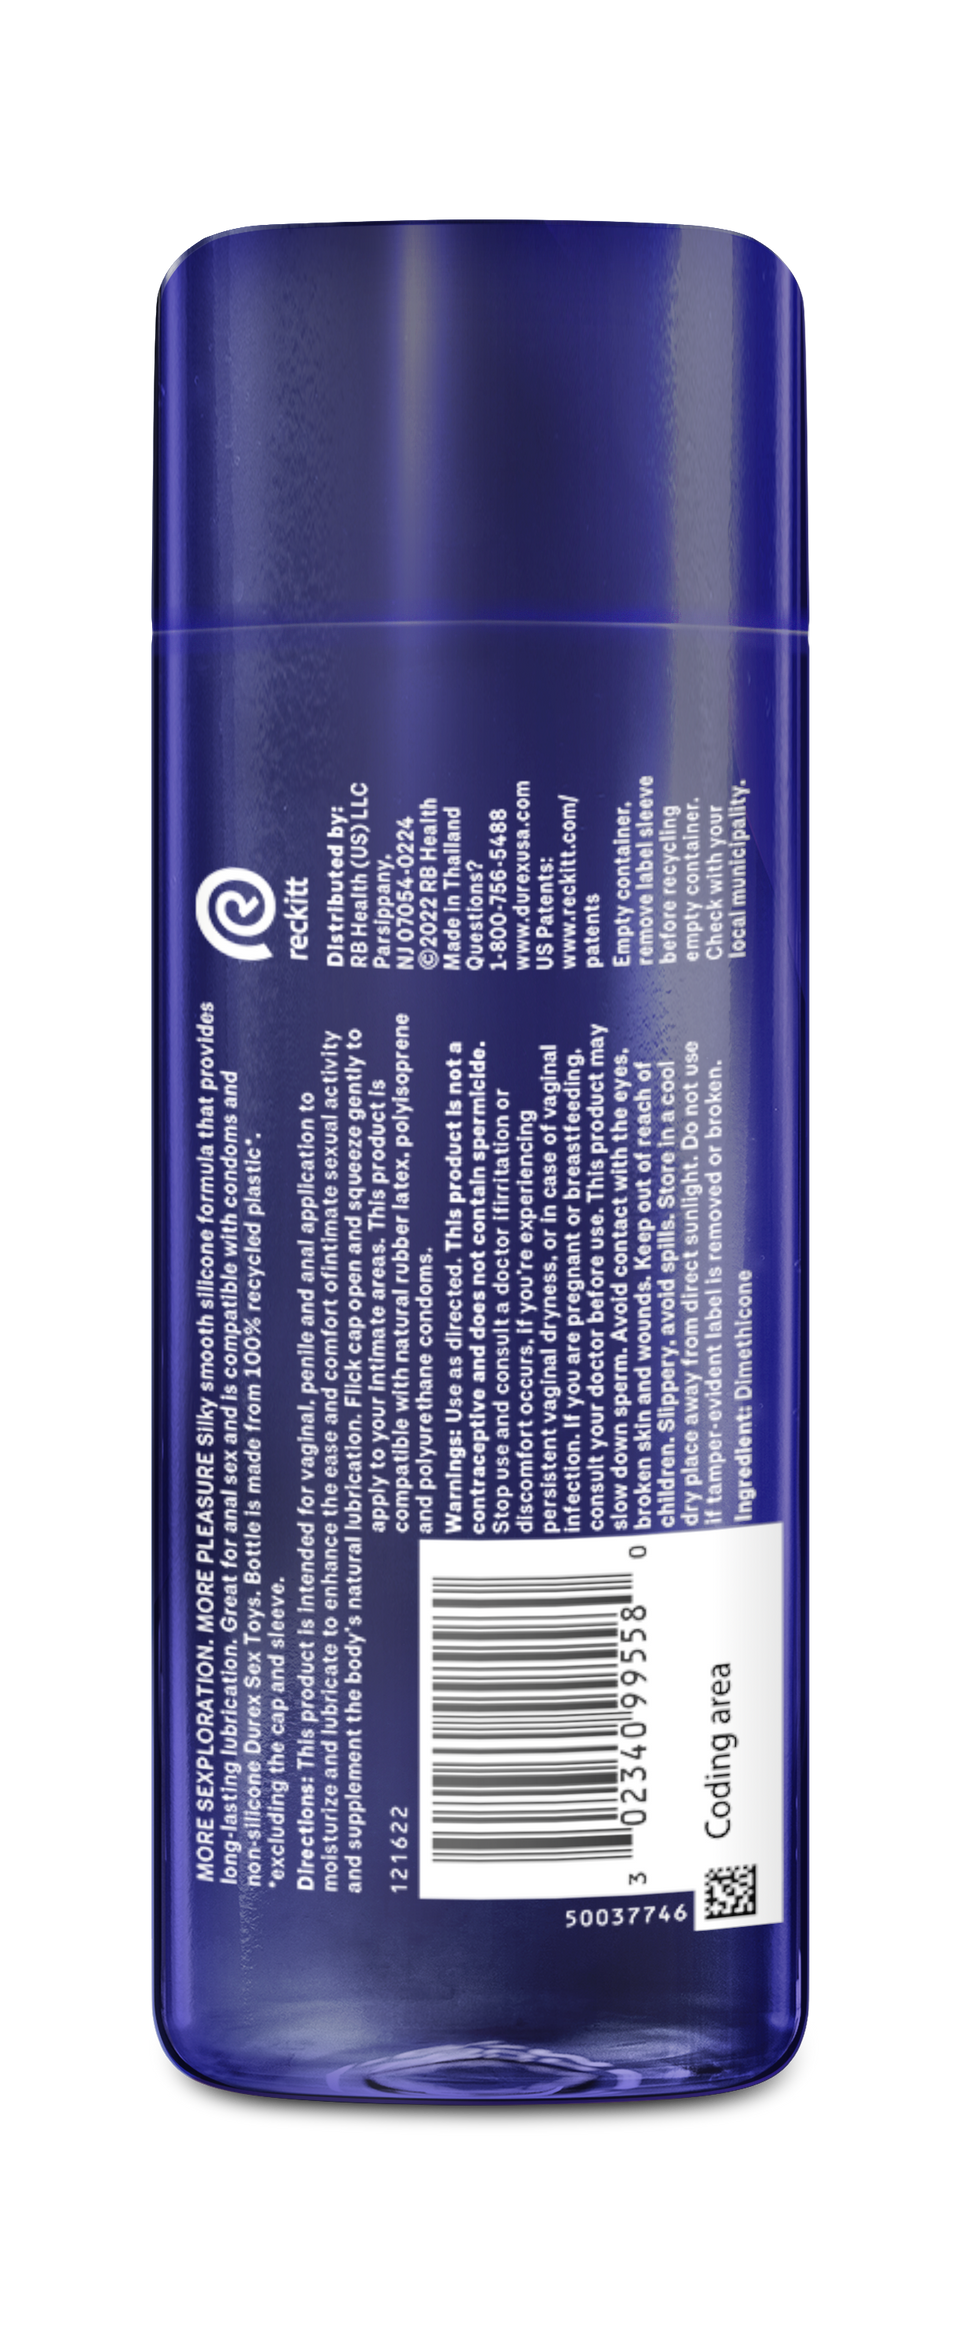 Durex<sup>®</sup> Cheeky Play Silicone Long Lasting Personal Lubricant, 3.38 fl oz